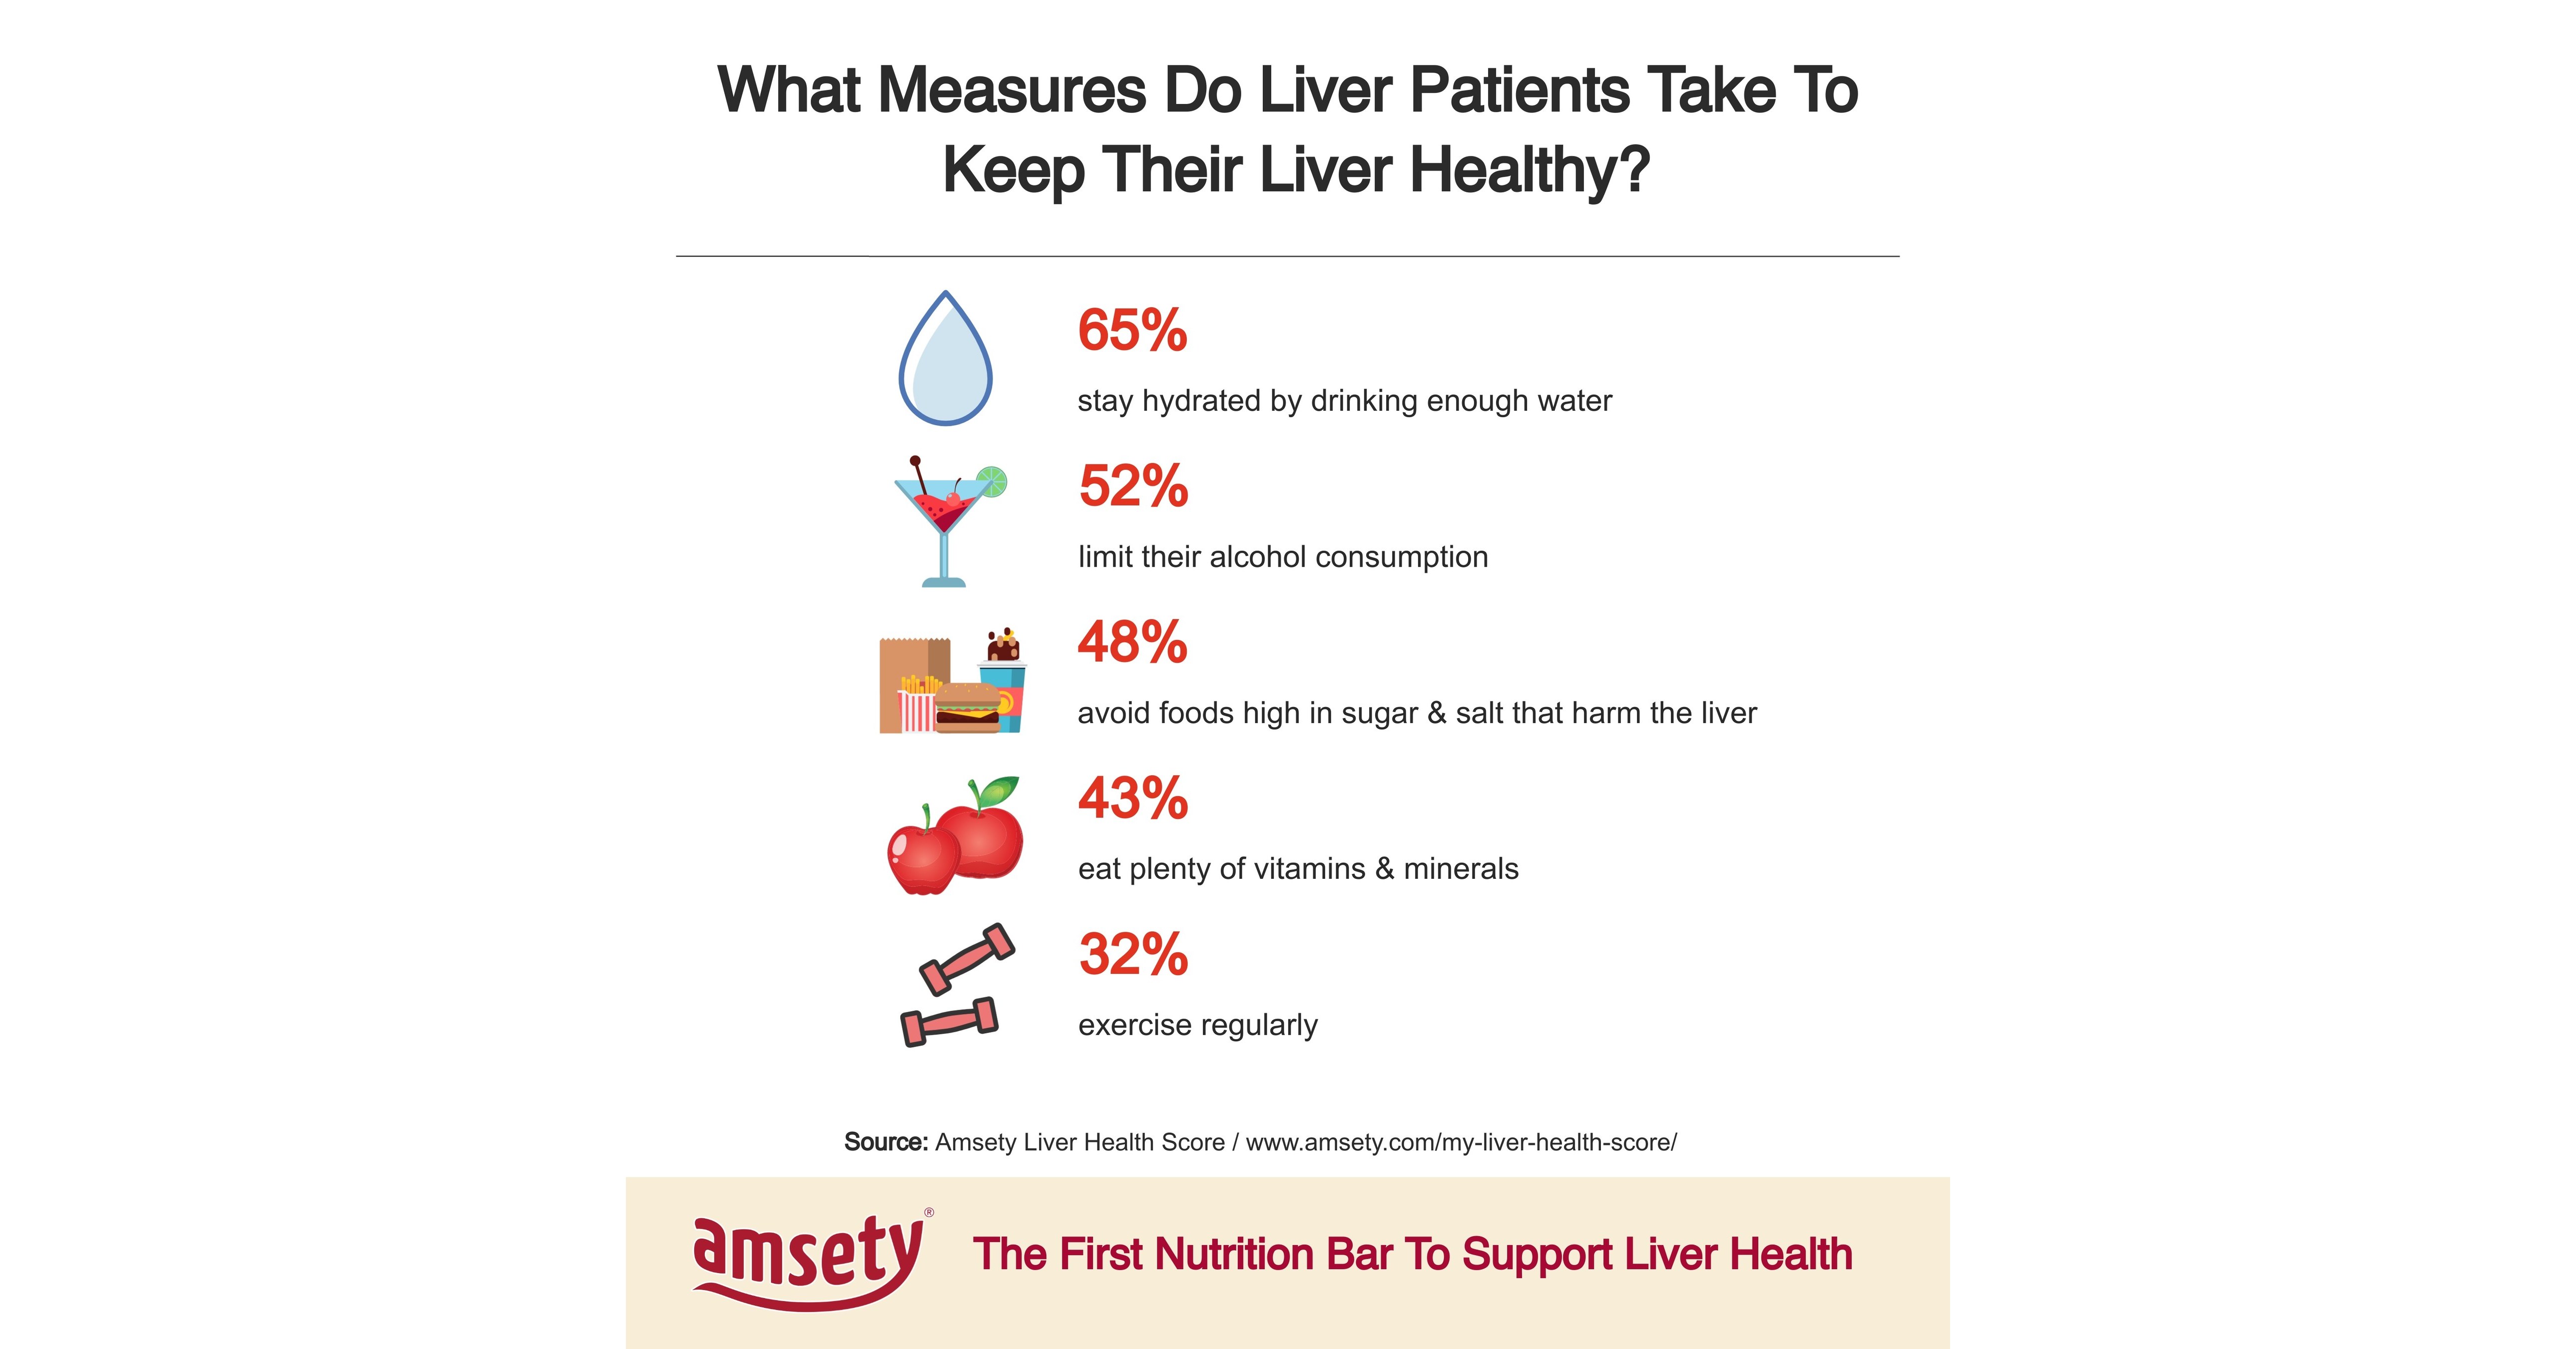 According to Amsety Not Enough Liver Patients Prioritize a Healthy Lifestyle